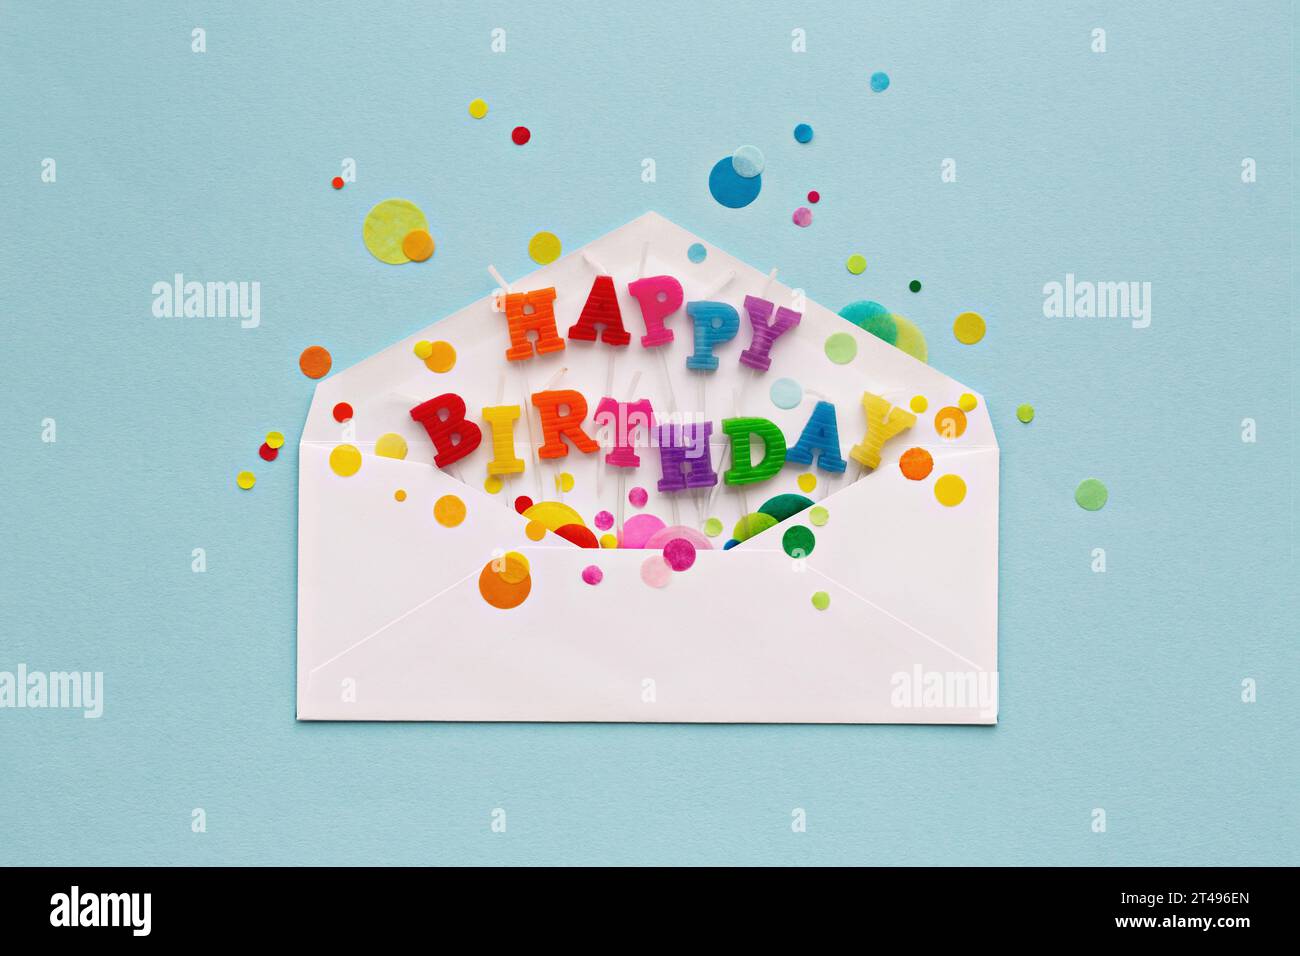 Birthday card envelope with colorful happy birthday candles and rainbow colored celebration confetti, overhead view Stock Photo